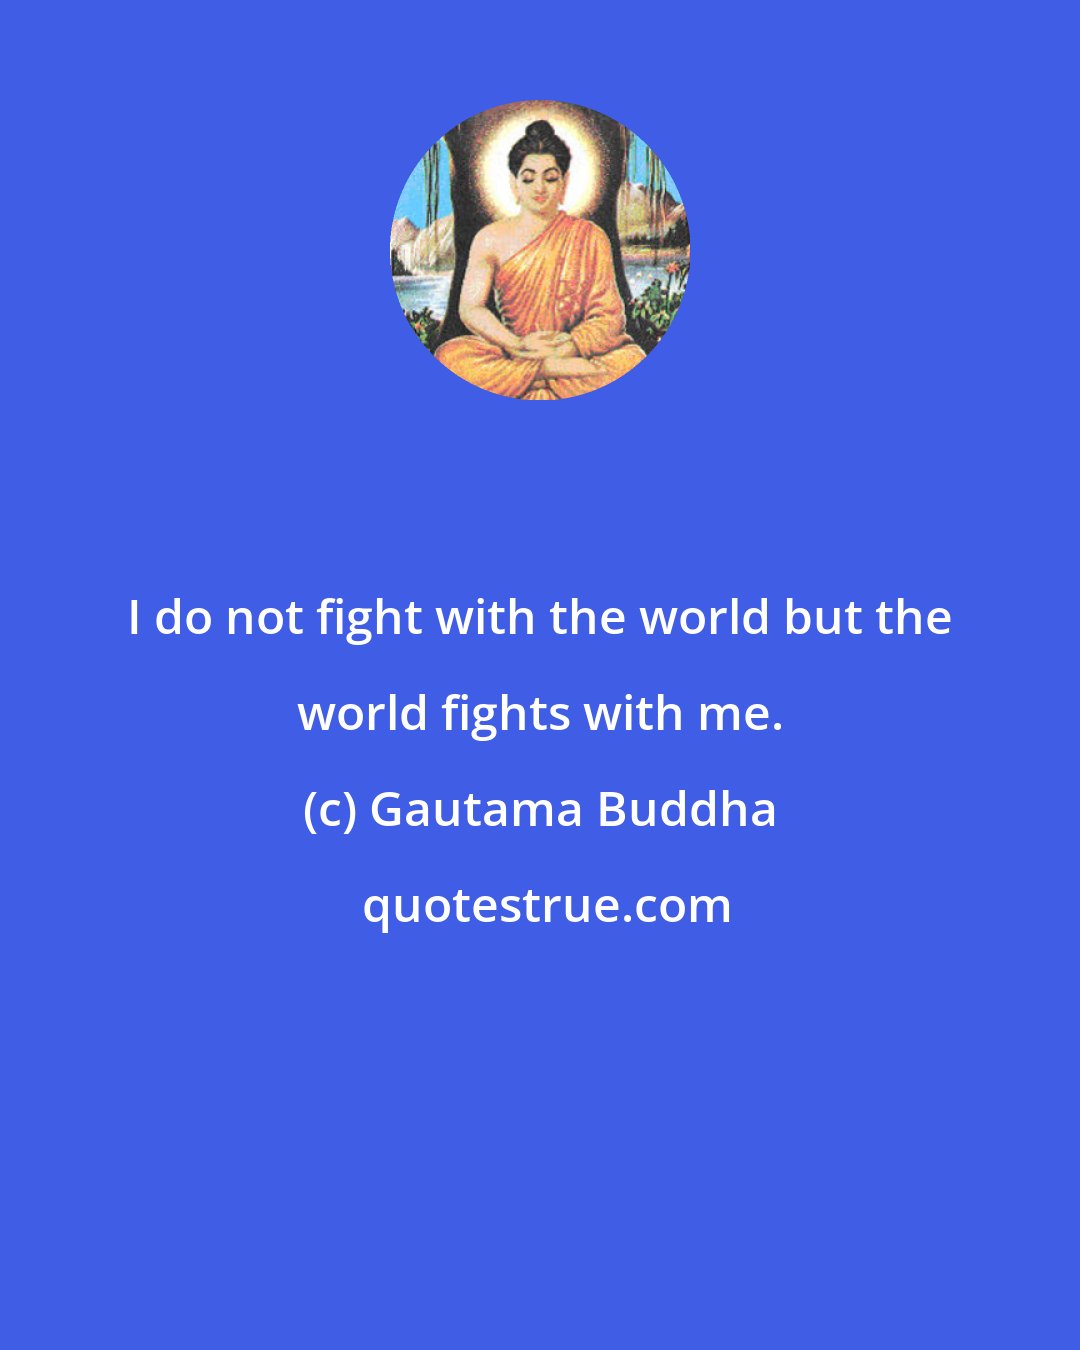 Gautama Buddha: I do not fight with the world but the world fights with me.